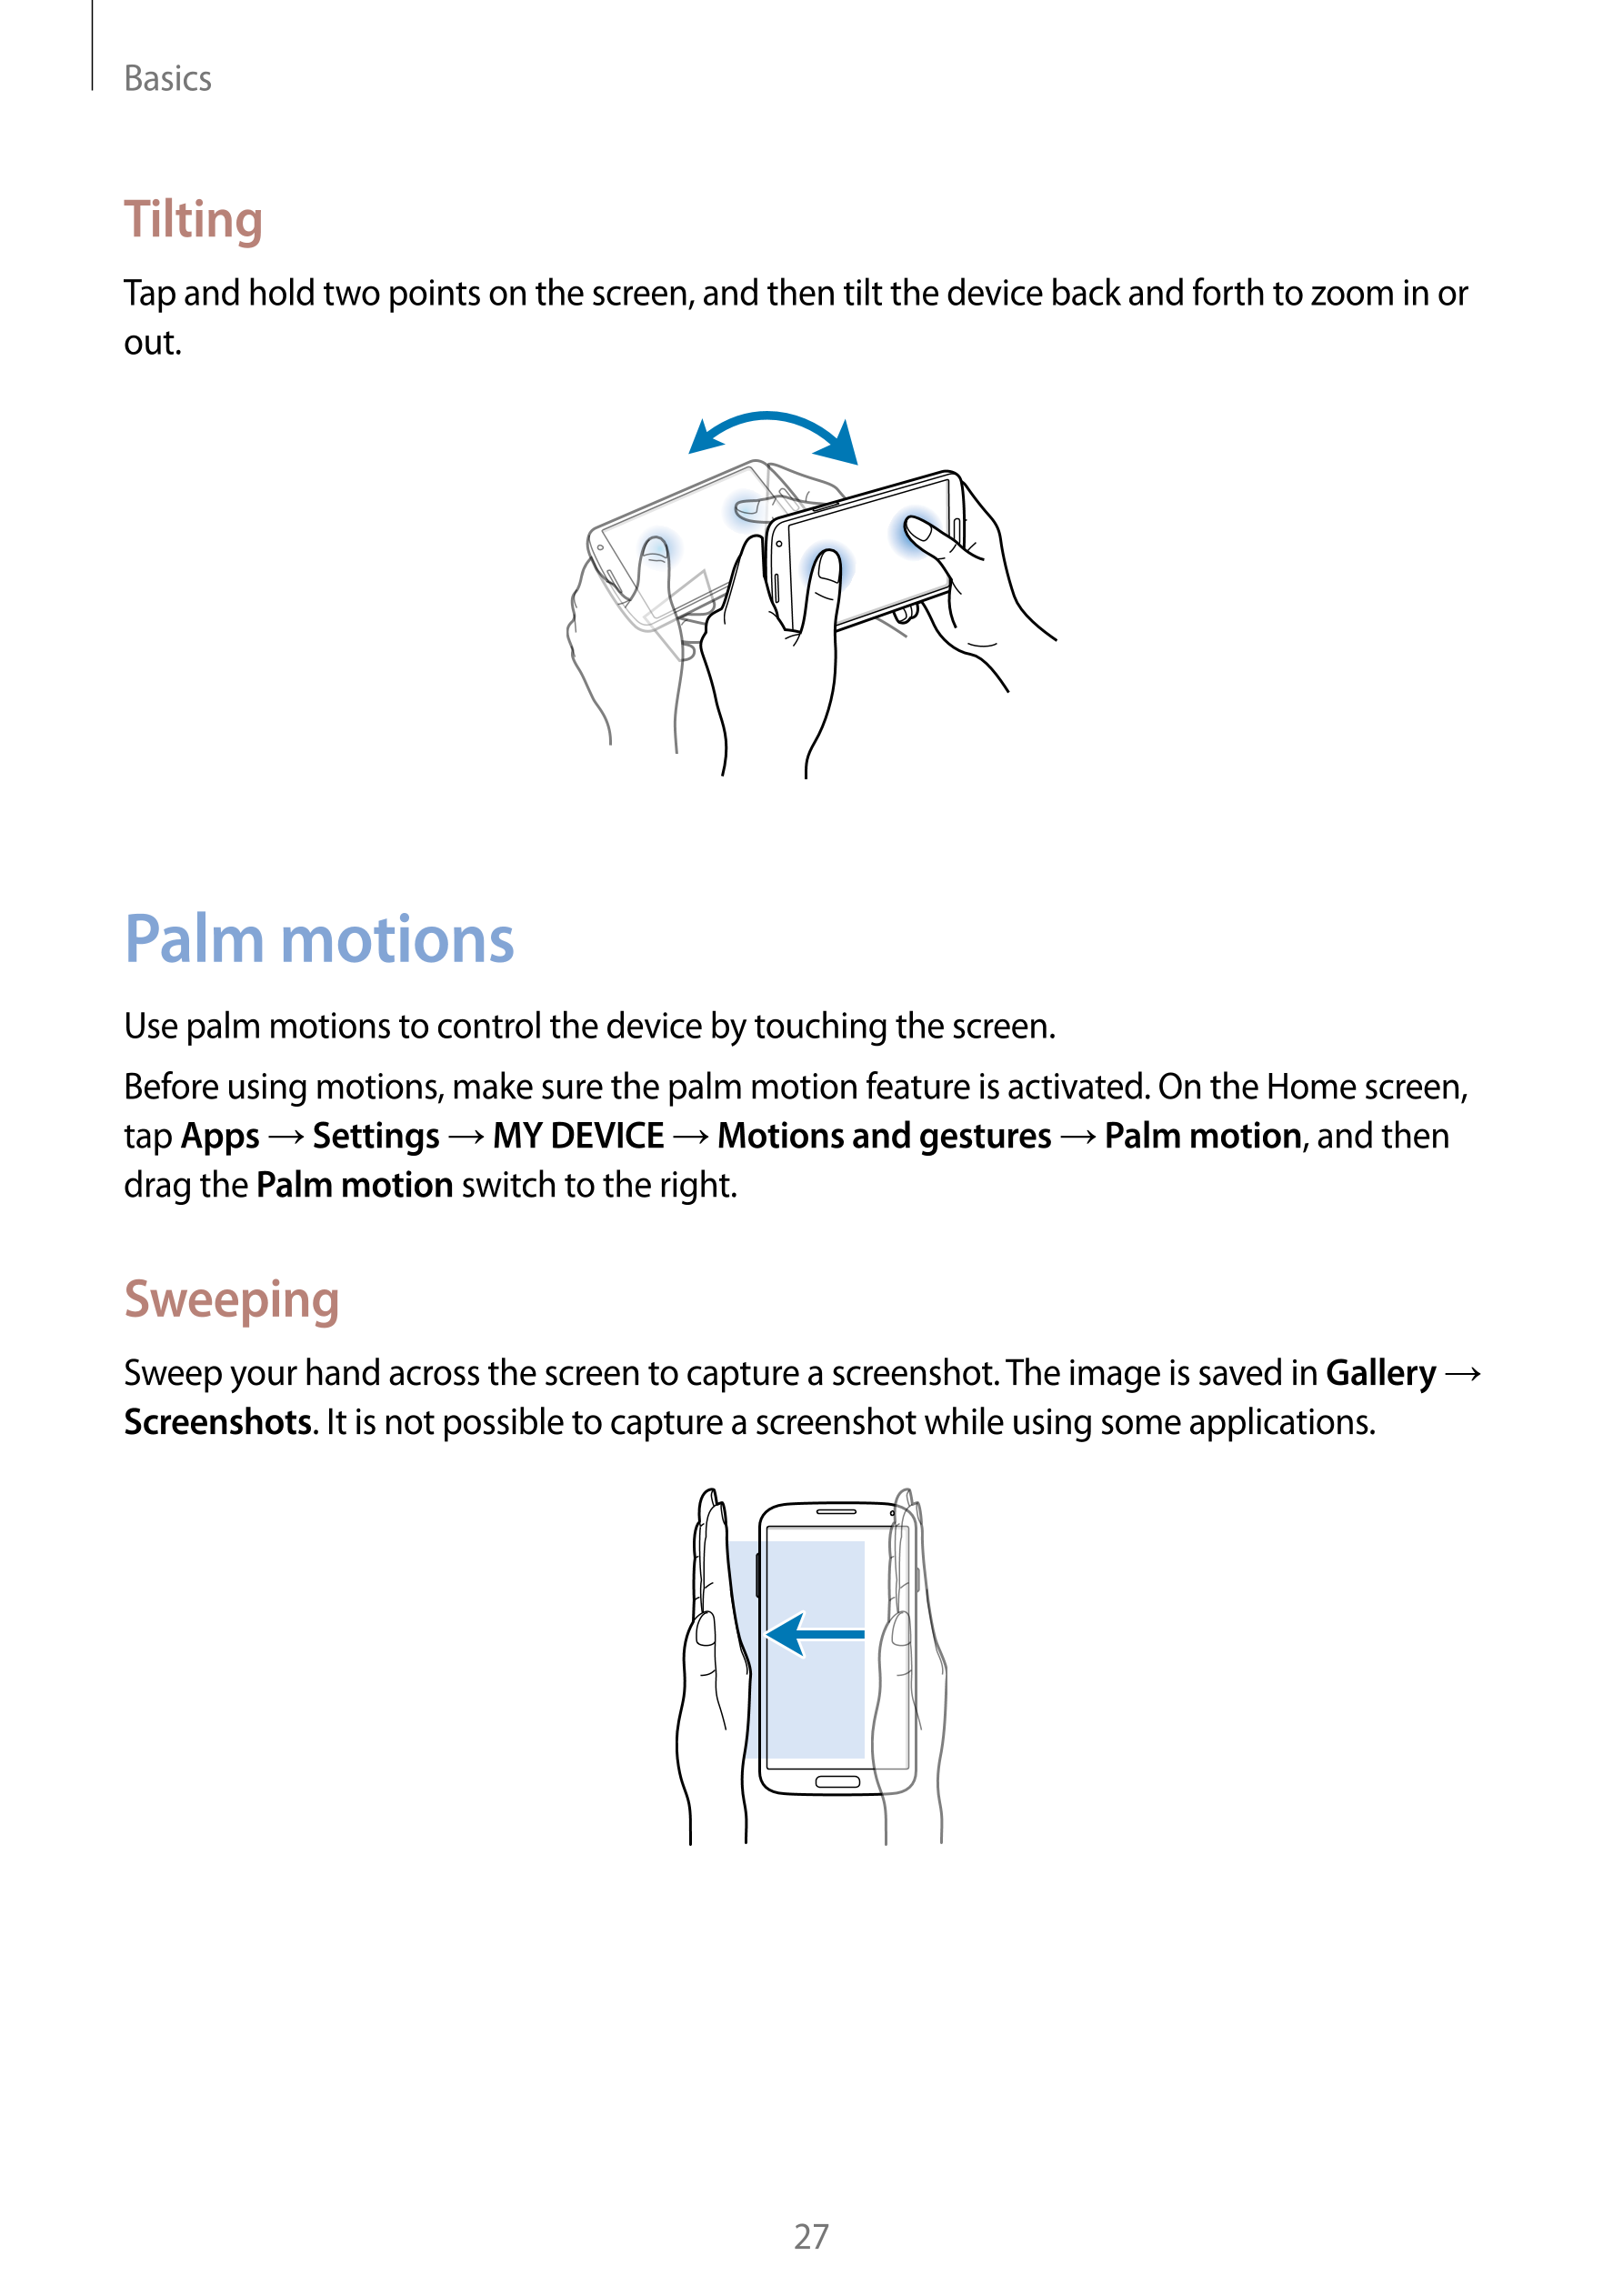 Basics
Tilting
Tap and hold two points on the screen, and then tilt the device back and forth to zoom in or 
out.
Palm motions
U